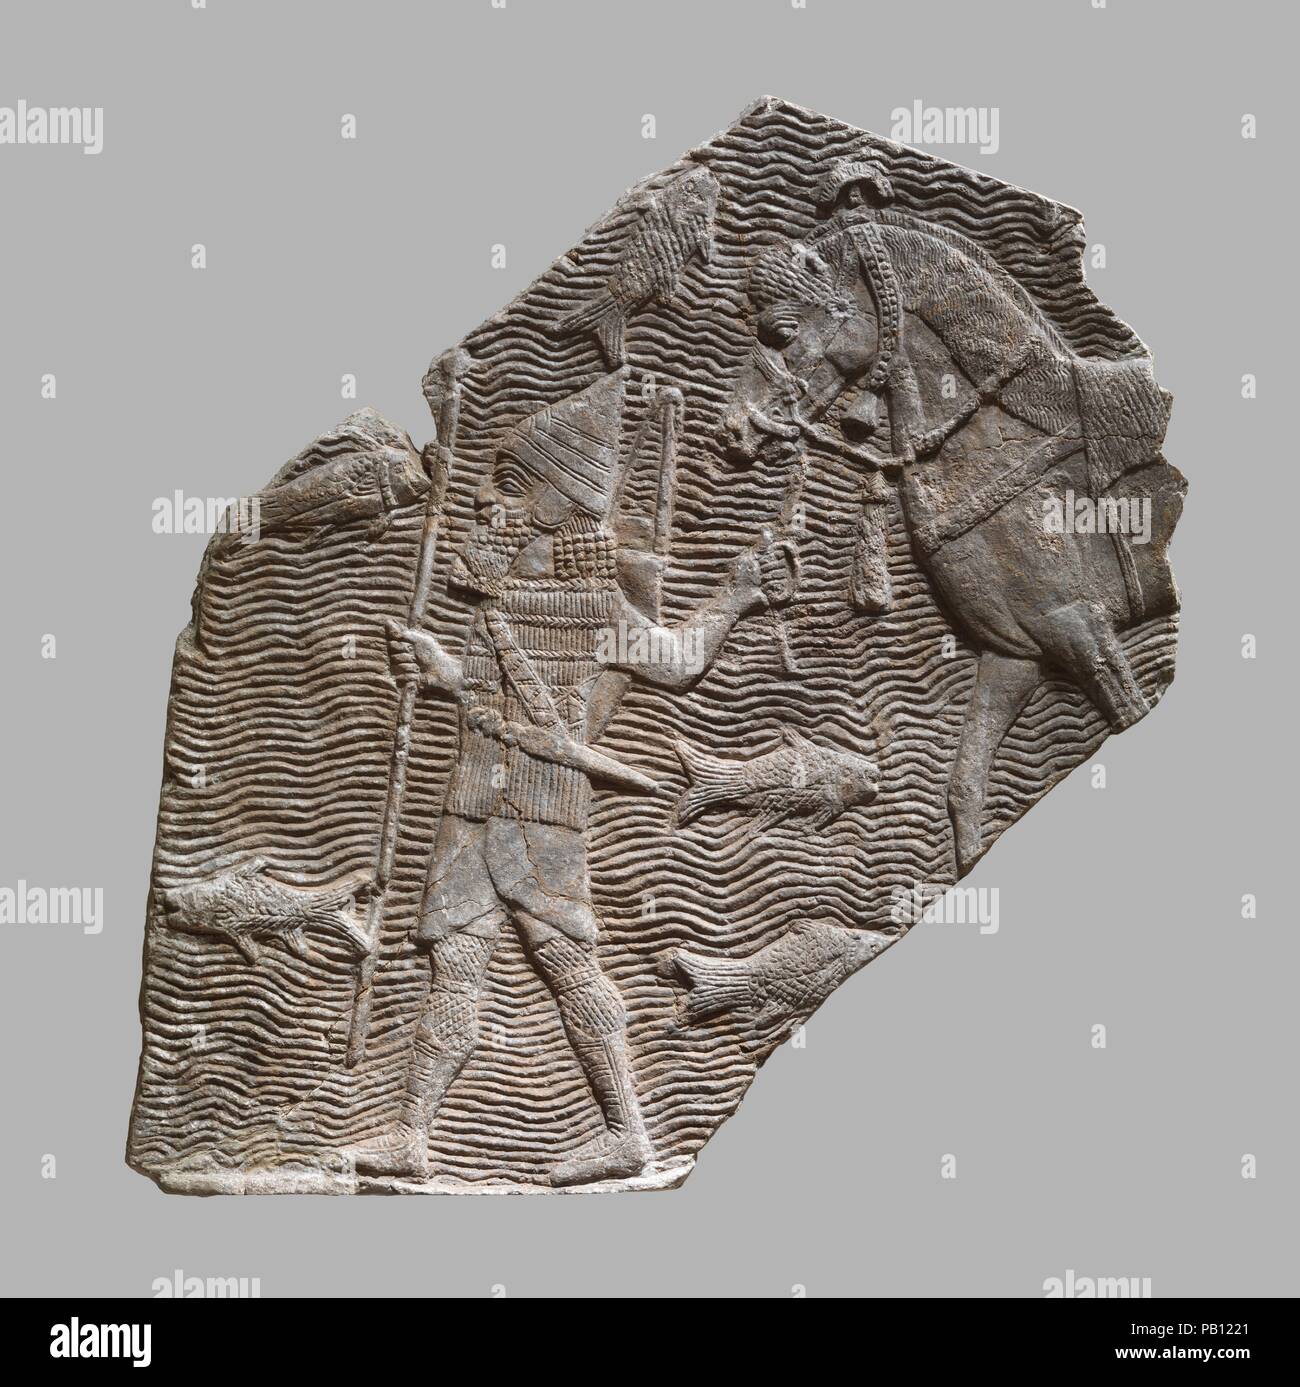 Relief fragment: cavalryman leading his horse beside a stream. Culture: Assyrian. Dimensions: H. 23 3/8 x W. 25 15/16 in. (59.3 x 65.8 cm). Date: ca. 704-681 B.C..  This relief fragment dates to the time of the Assyrian king Sennacherib (r. 704-681 B.C.), and comes from the great Southwest Palace, called by Sennacherib the 'Palace Without Rival,' at Nineveh in northern Iraq. It shows an Assyrian soldier leading a horse beside a large river, and comes originally from a much larger scene depicting an Assyrian campaign that filled a room of the palace.  The soldier is equipped in typical Assyrian Stock Photo